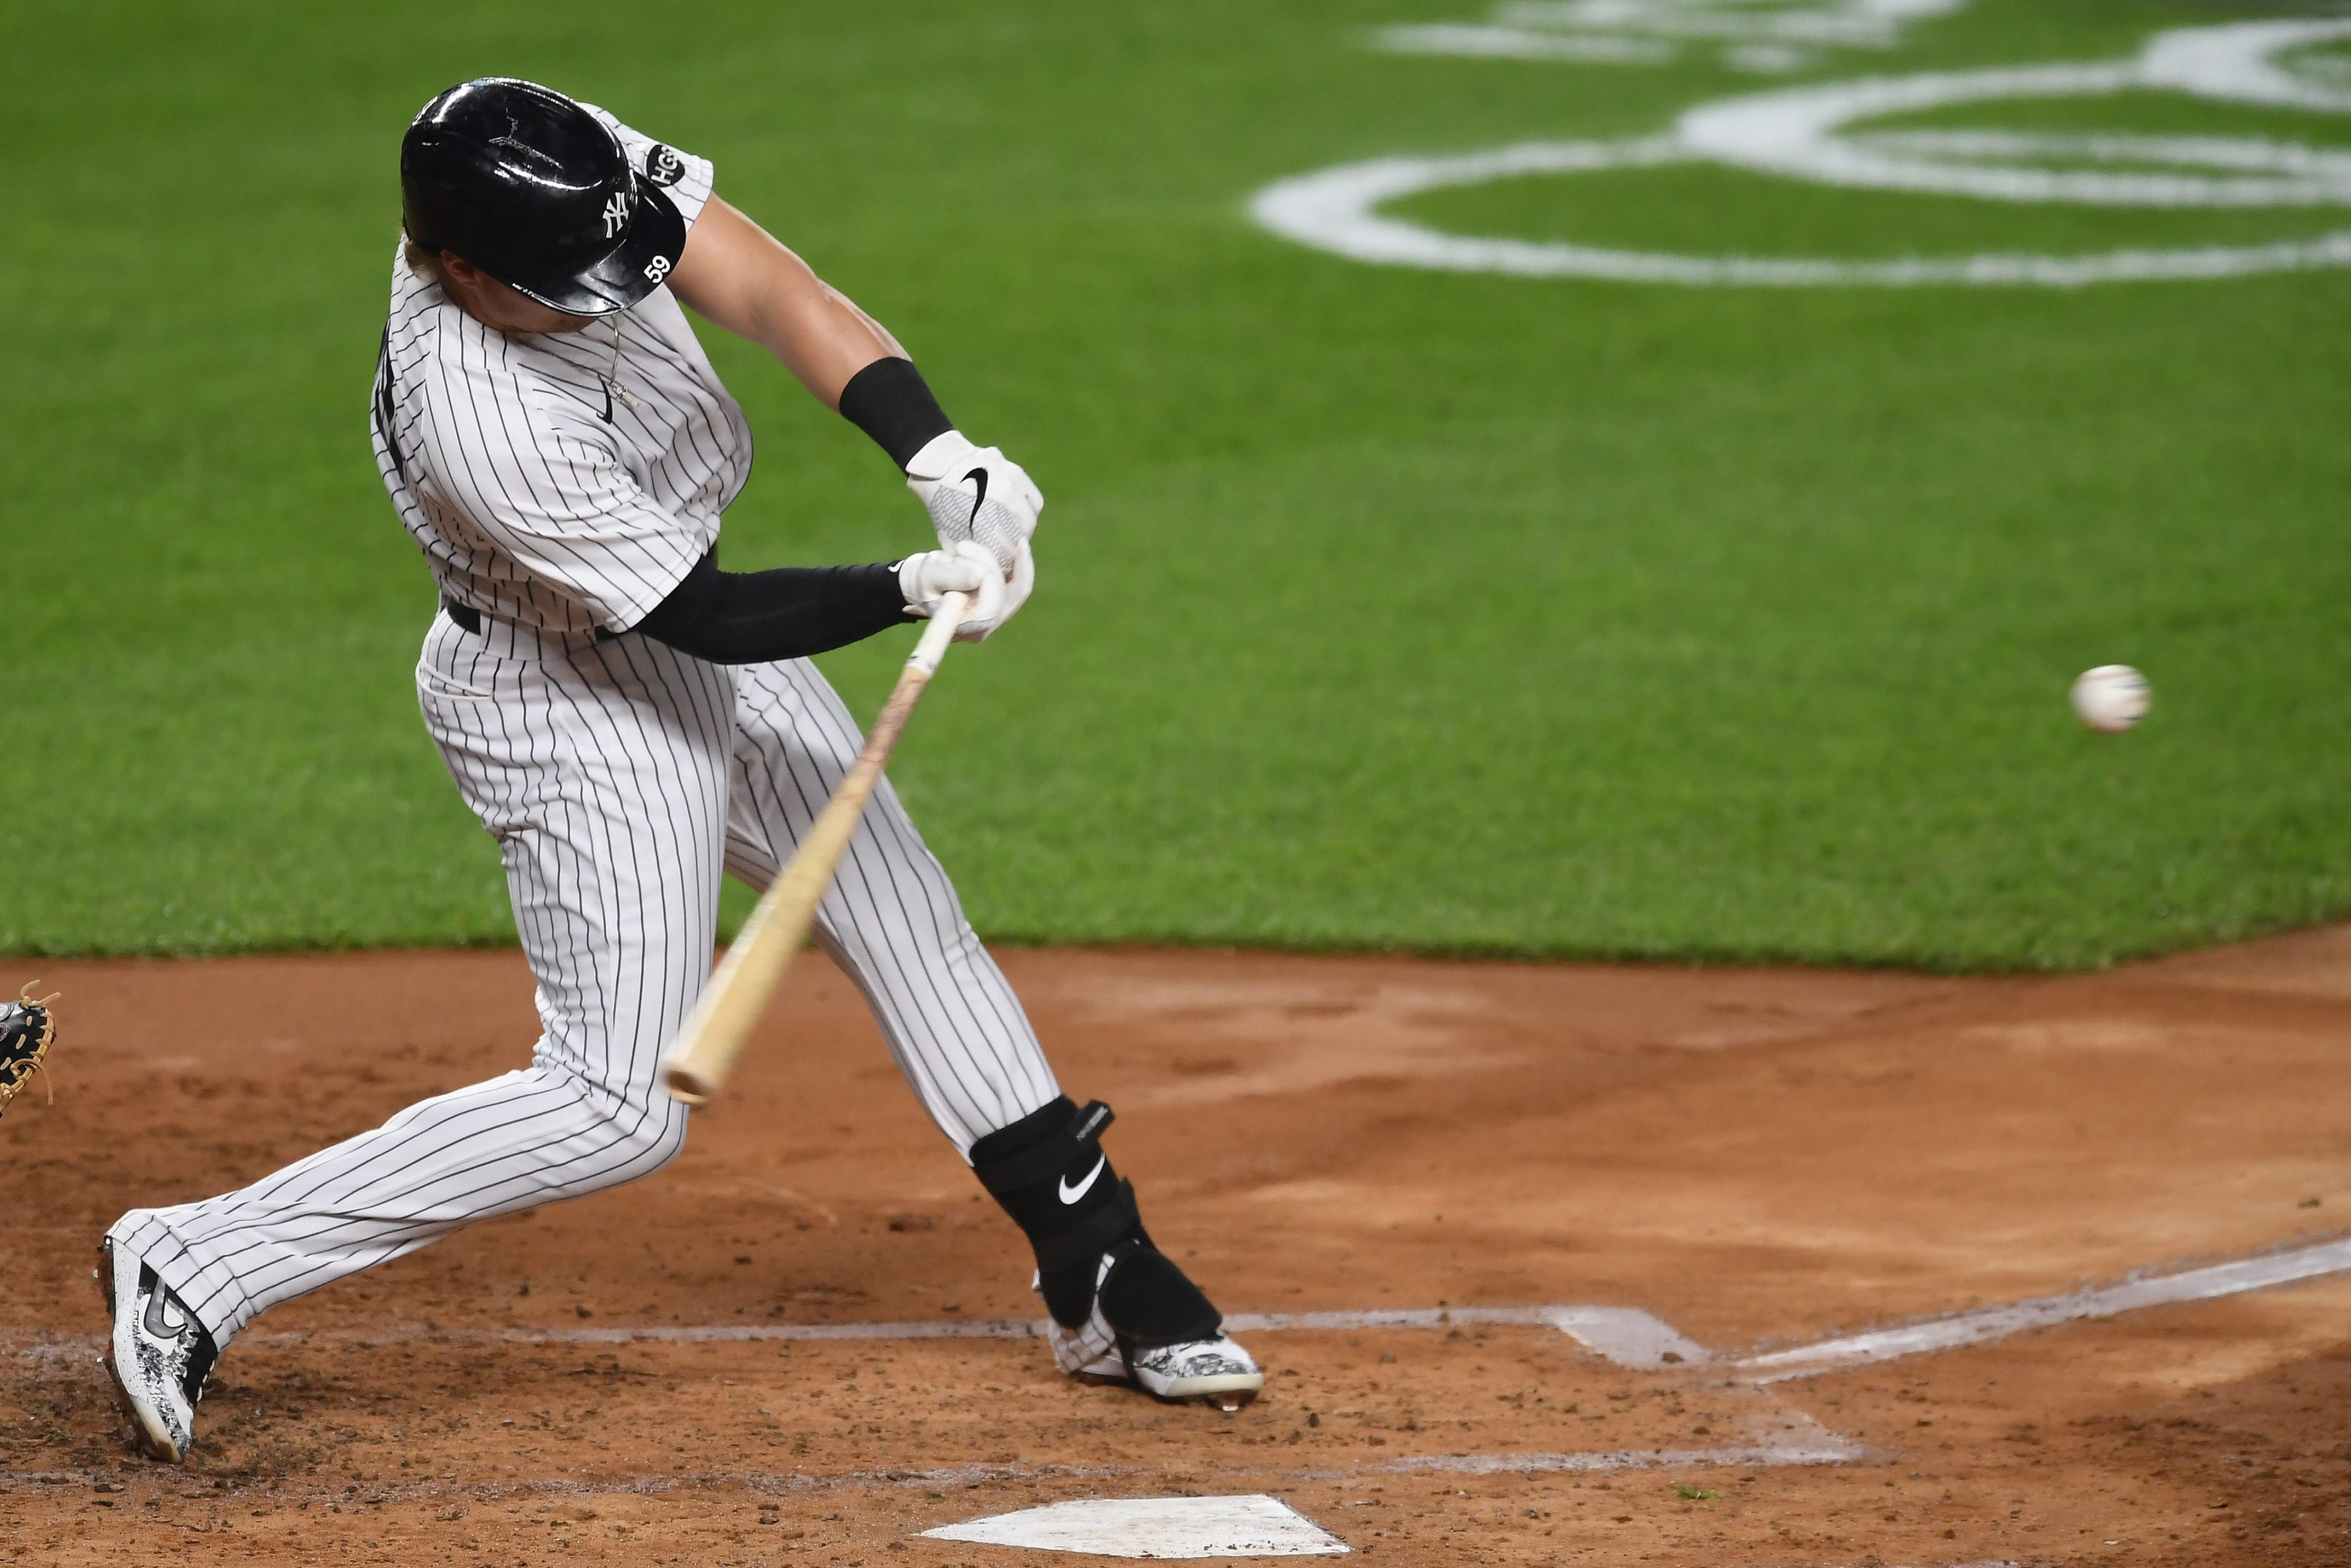 Luke Voit #59 of the New York Yankees hits a three-run home run during the second inning against the Toronto Blue Jays at Yankee Stadium